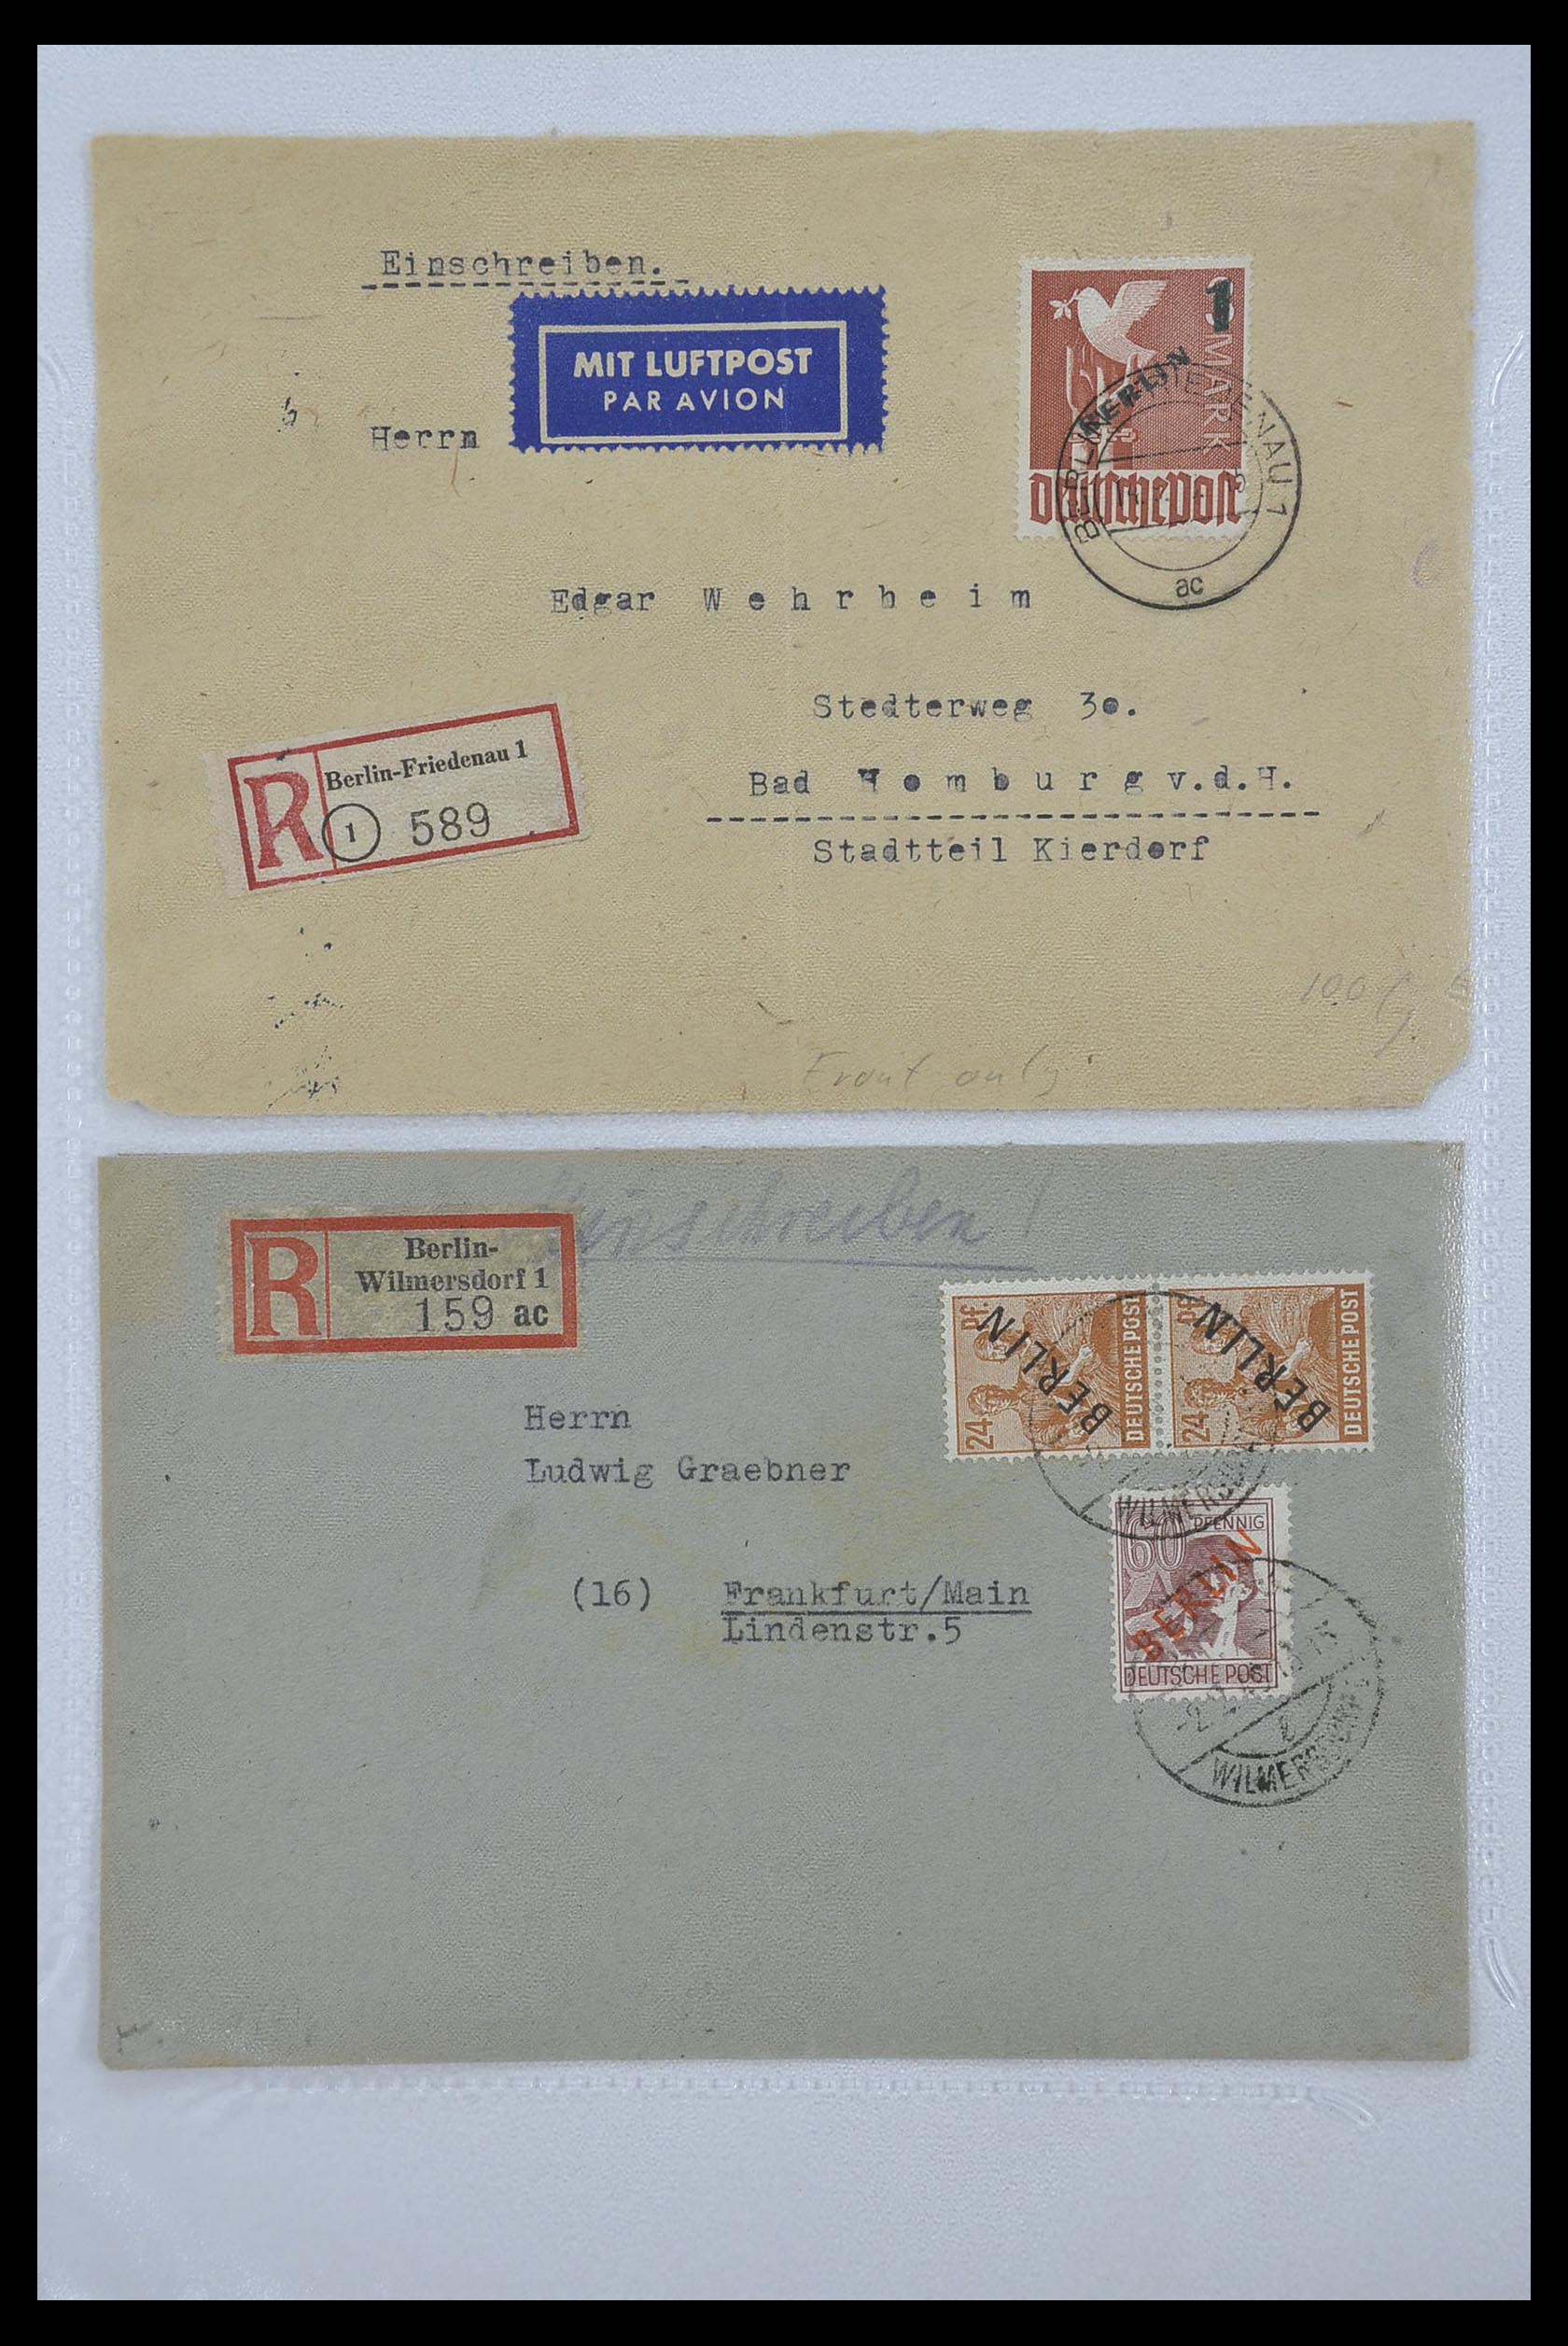 33290 031 - Stamp collection 33290 Berlin covers 1948-1957.